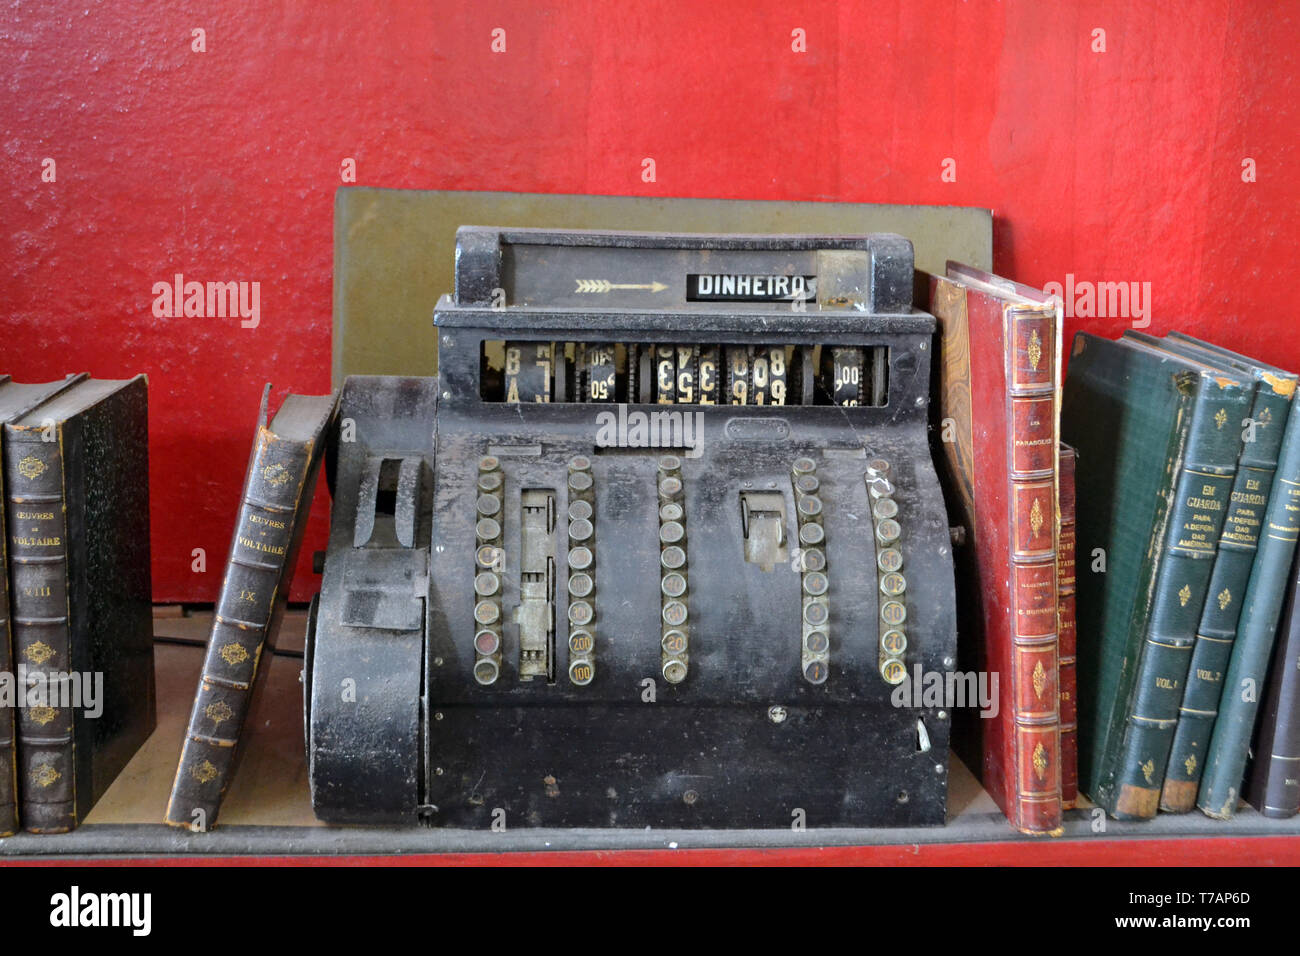 old cash register surrounded by books Stock Photo